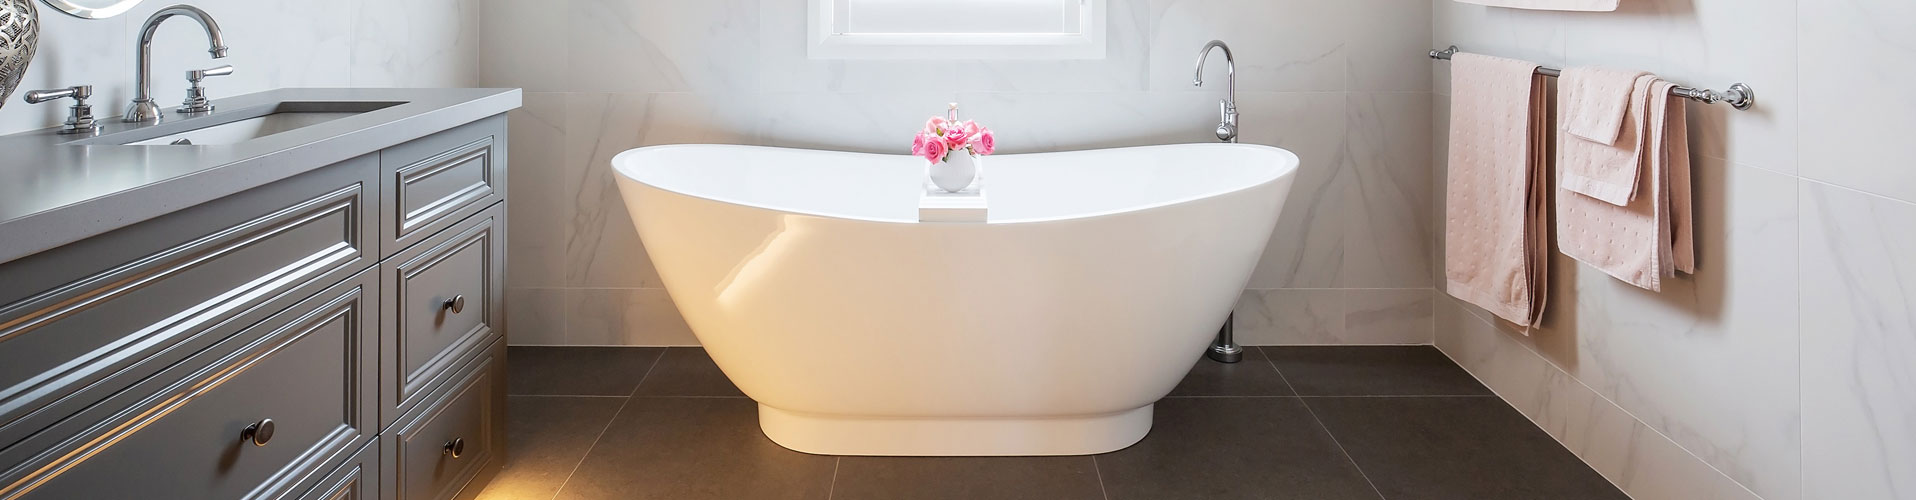 Simple guidelines for Northern Beaches Bathroom Renovations that you should follow | TechPlanet